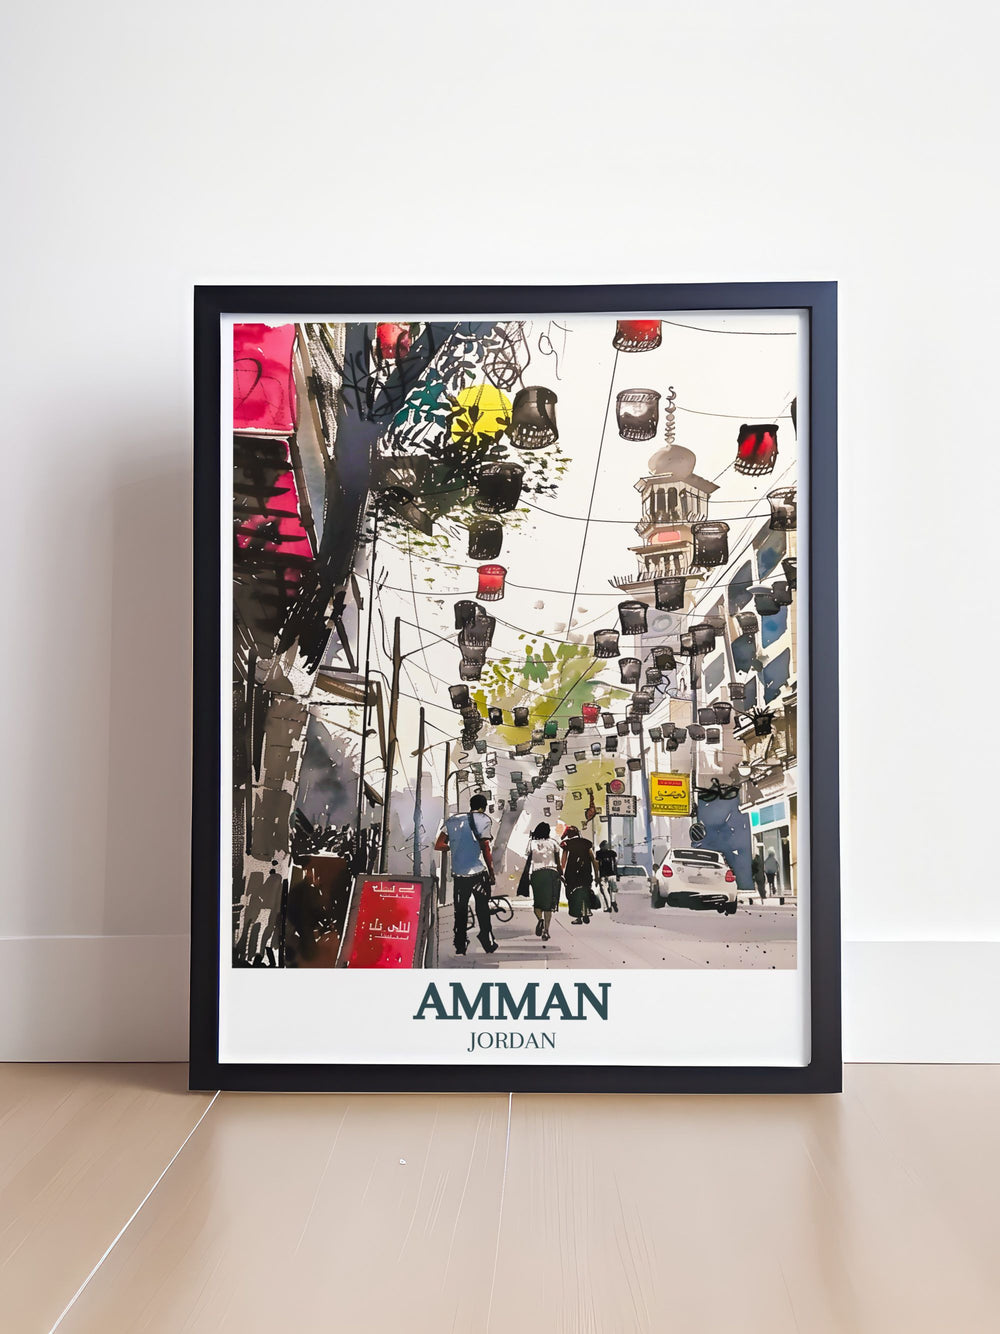 Stunning Amman Art Print showcasing Rainbow Street King Abdullah Mosque ideal for personalized gifts and home decoration adding a touch of Jordans cultural charm to any space